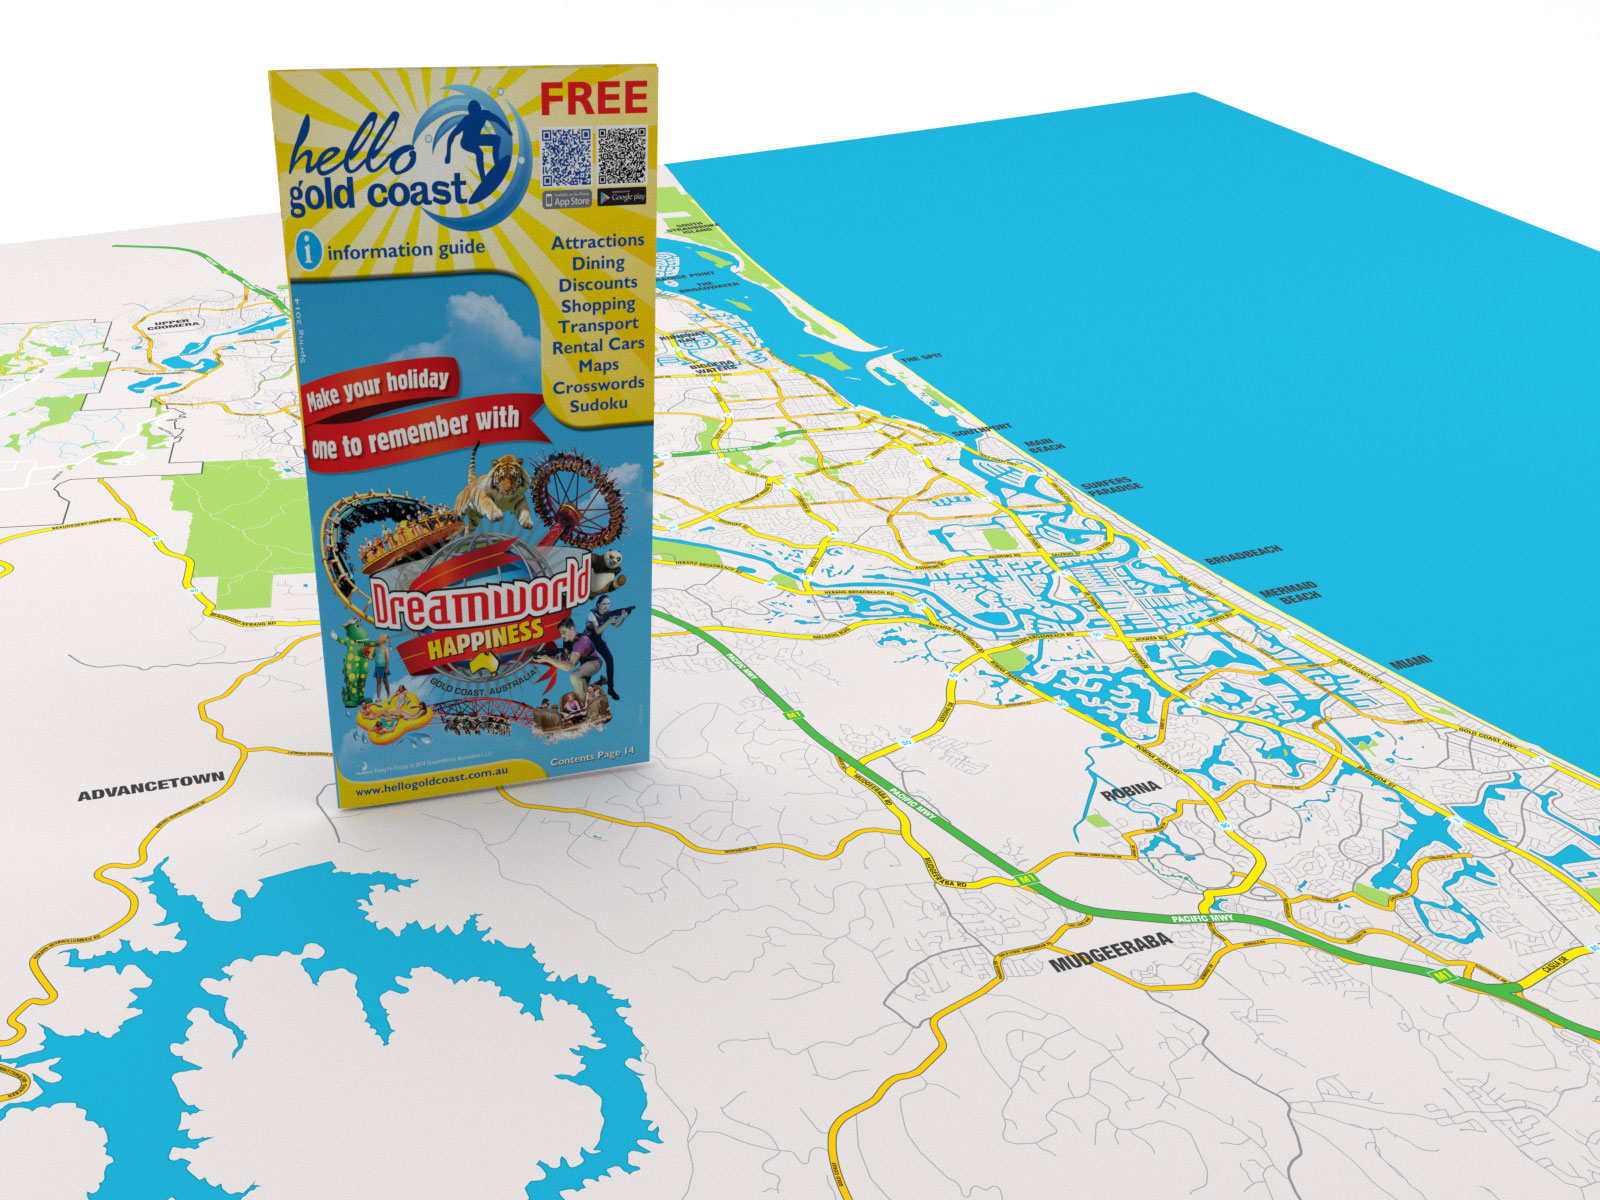 Brochure standing on a gold coast map illustrated in great detail